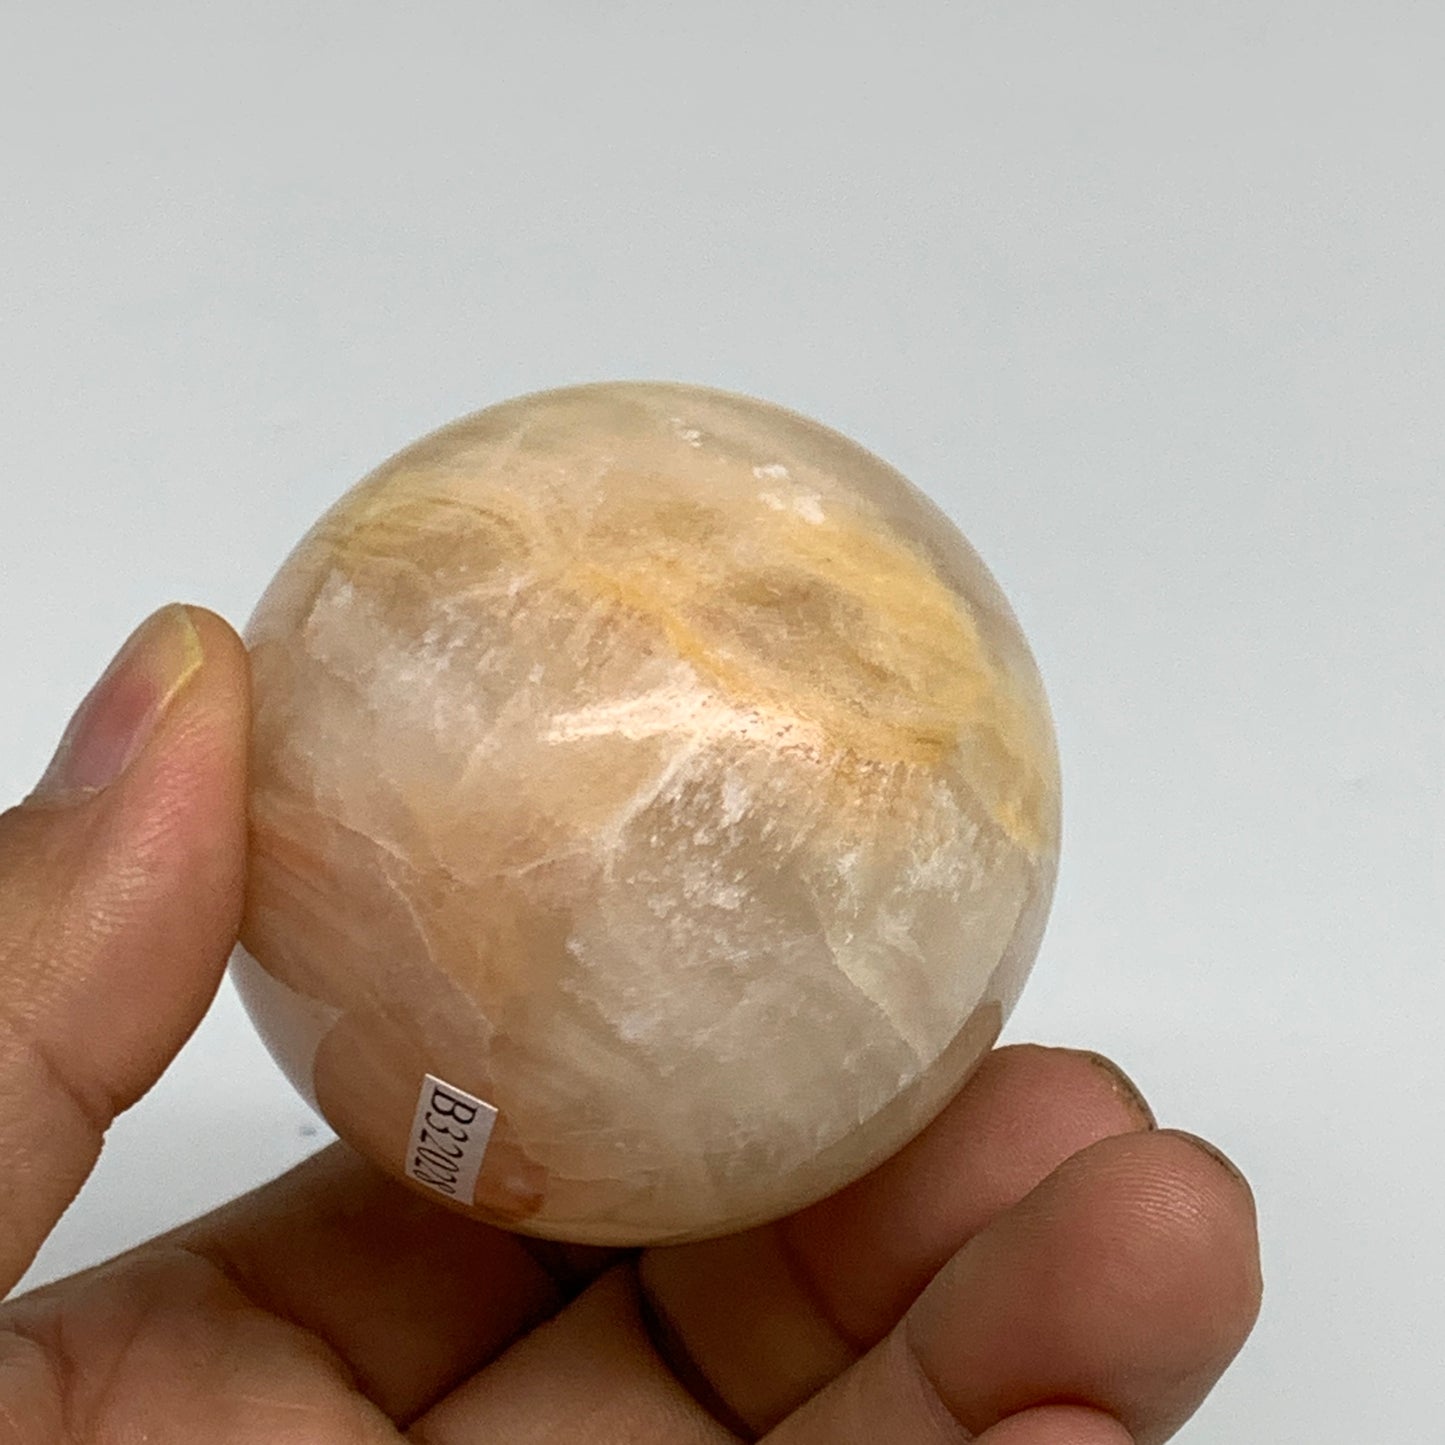 264g, 2.7"x2" Natural Green Onyx Egg Gemstone Mineral, from Pakistan, B32028